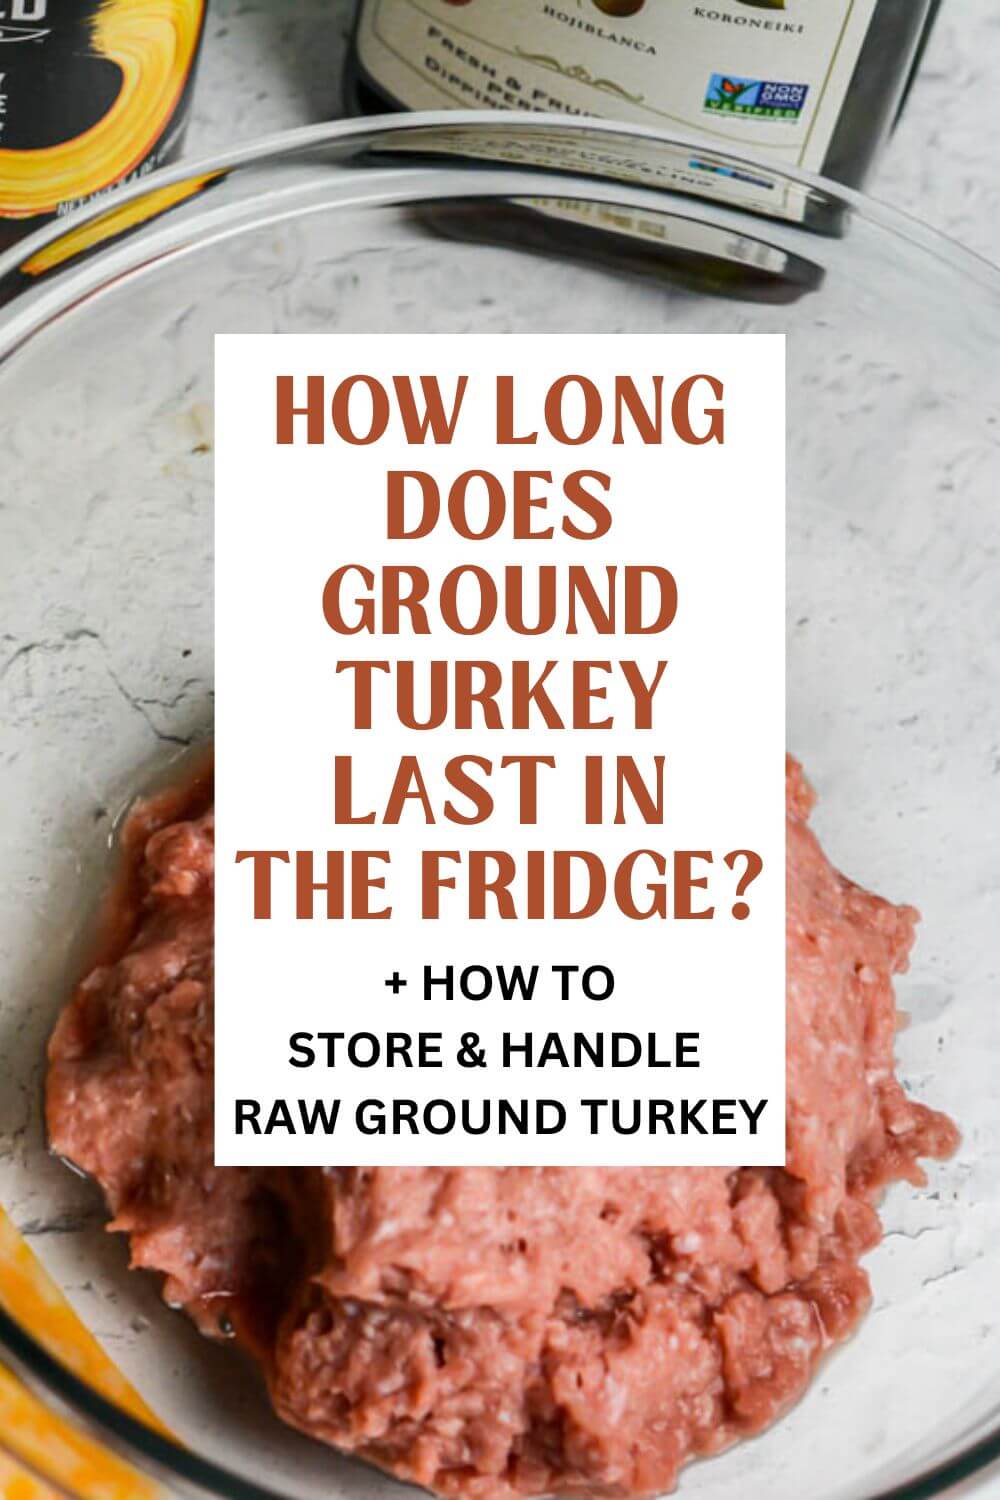 How Long Does Ground Turkey Last in the Fridge?